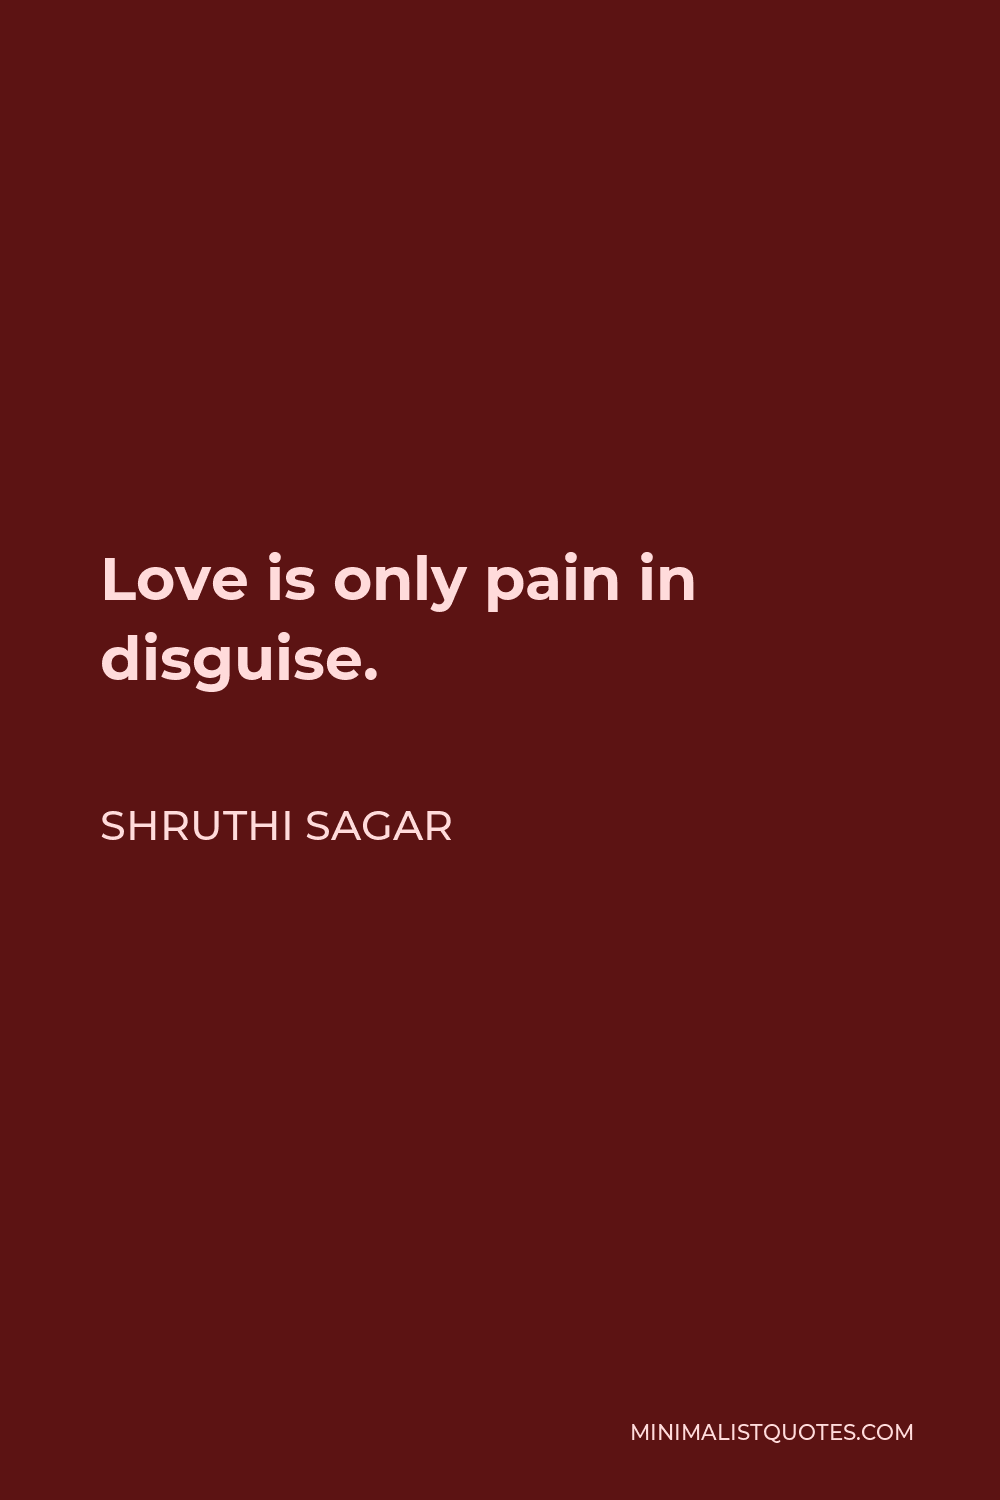 Shruthi Sagar Quote - Love is only pain in disguise.